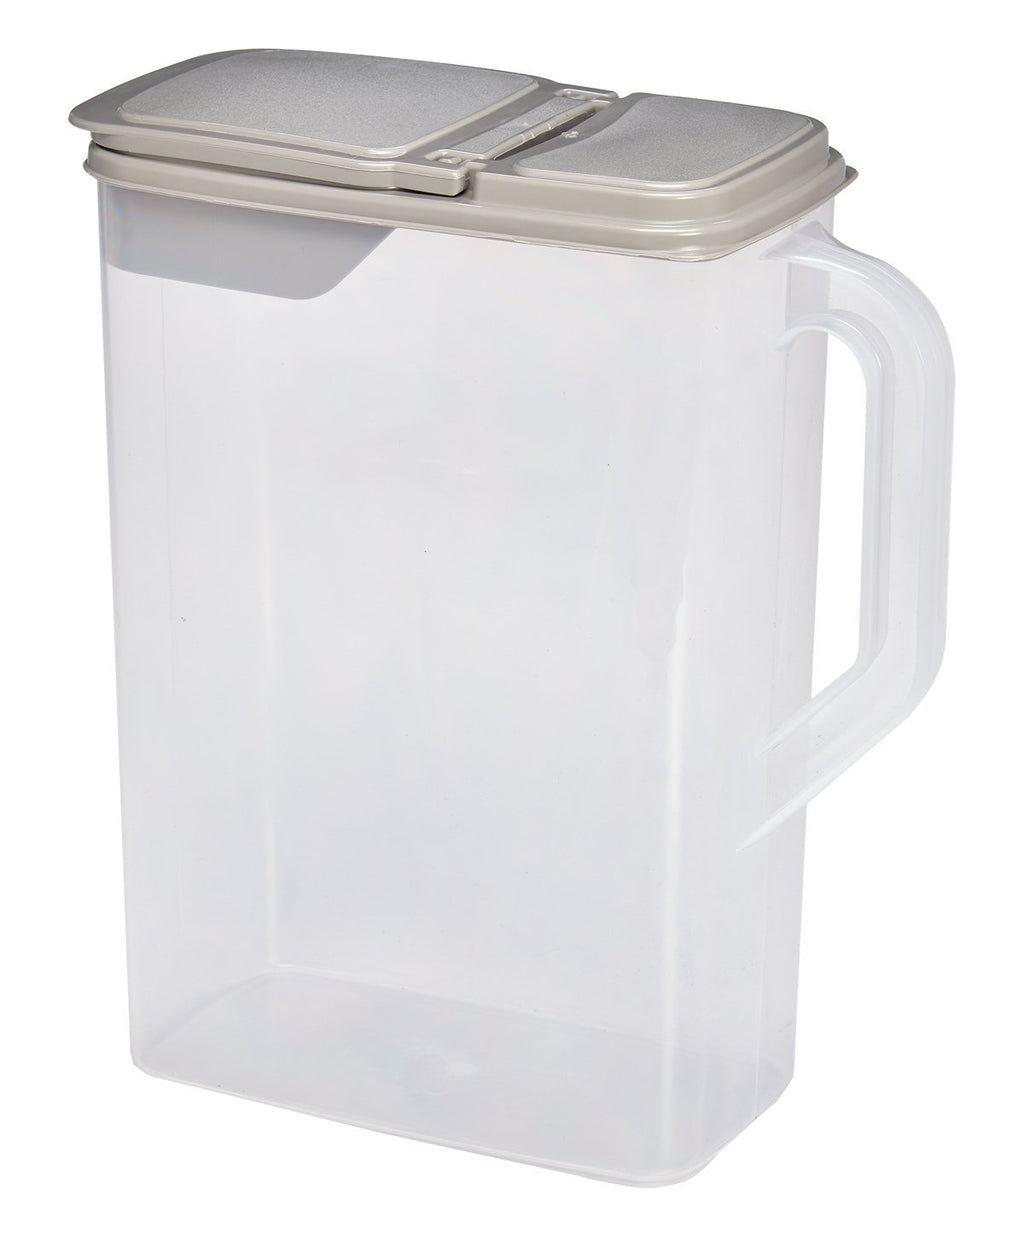 [Australia] - Dry Pet Food and Seed Storage Container |8 Quart| With Flip Lid and Bonus 1 Cup Scoop: BPA Free by Buddeez 